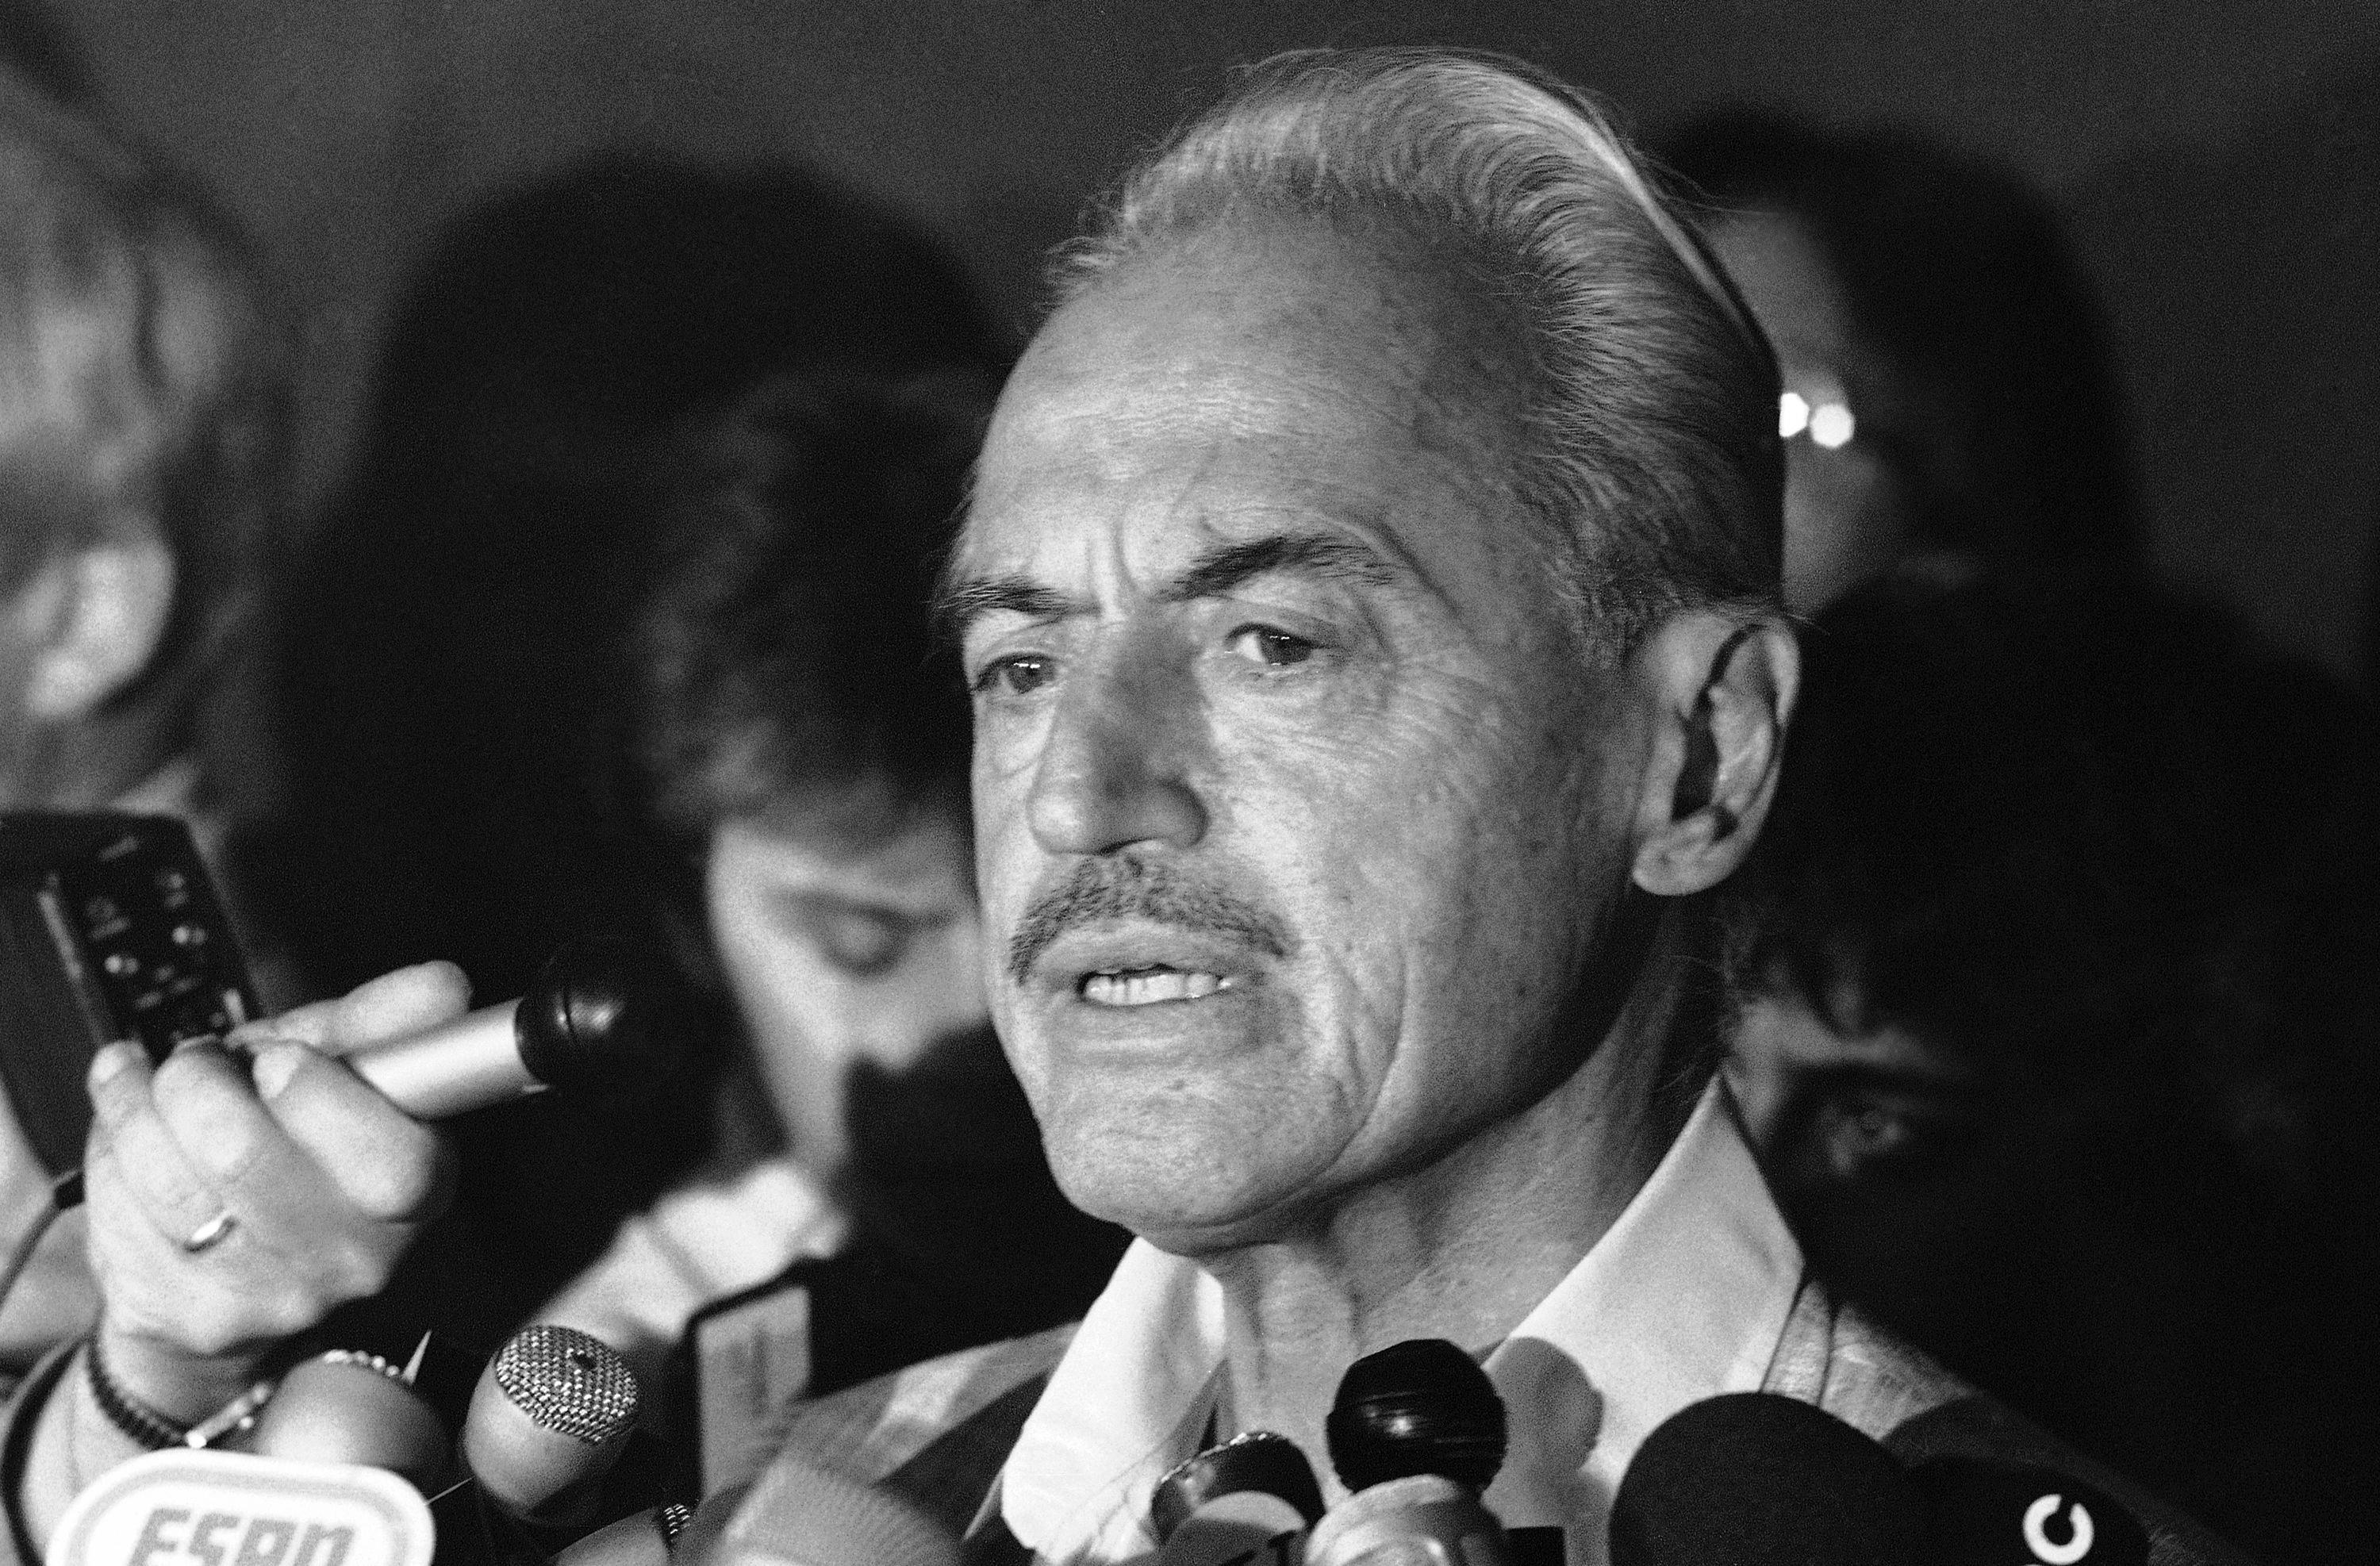 Union executive Marvin Miller, former catcher Ted Simmons elected